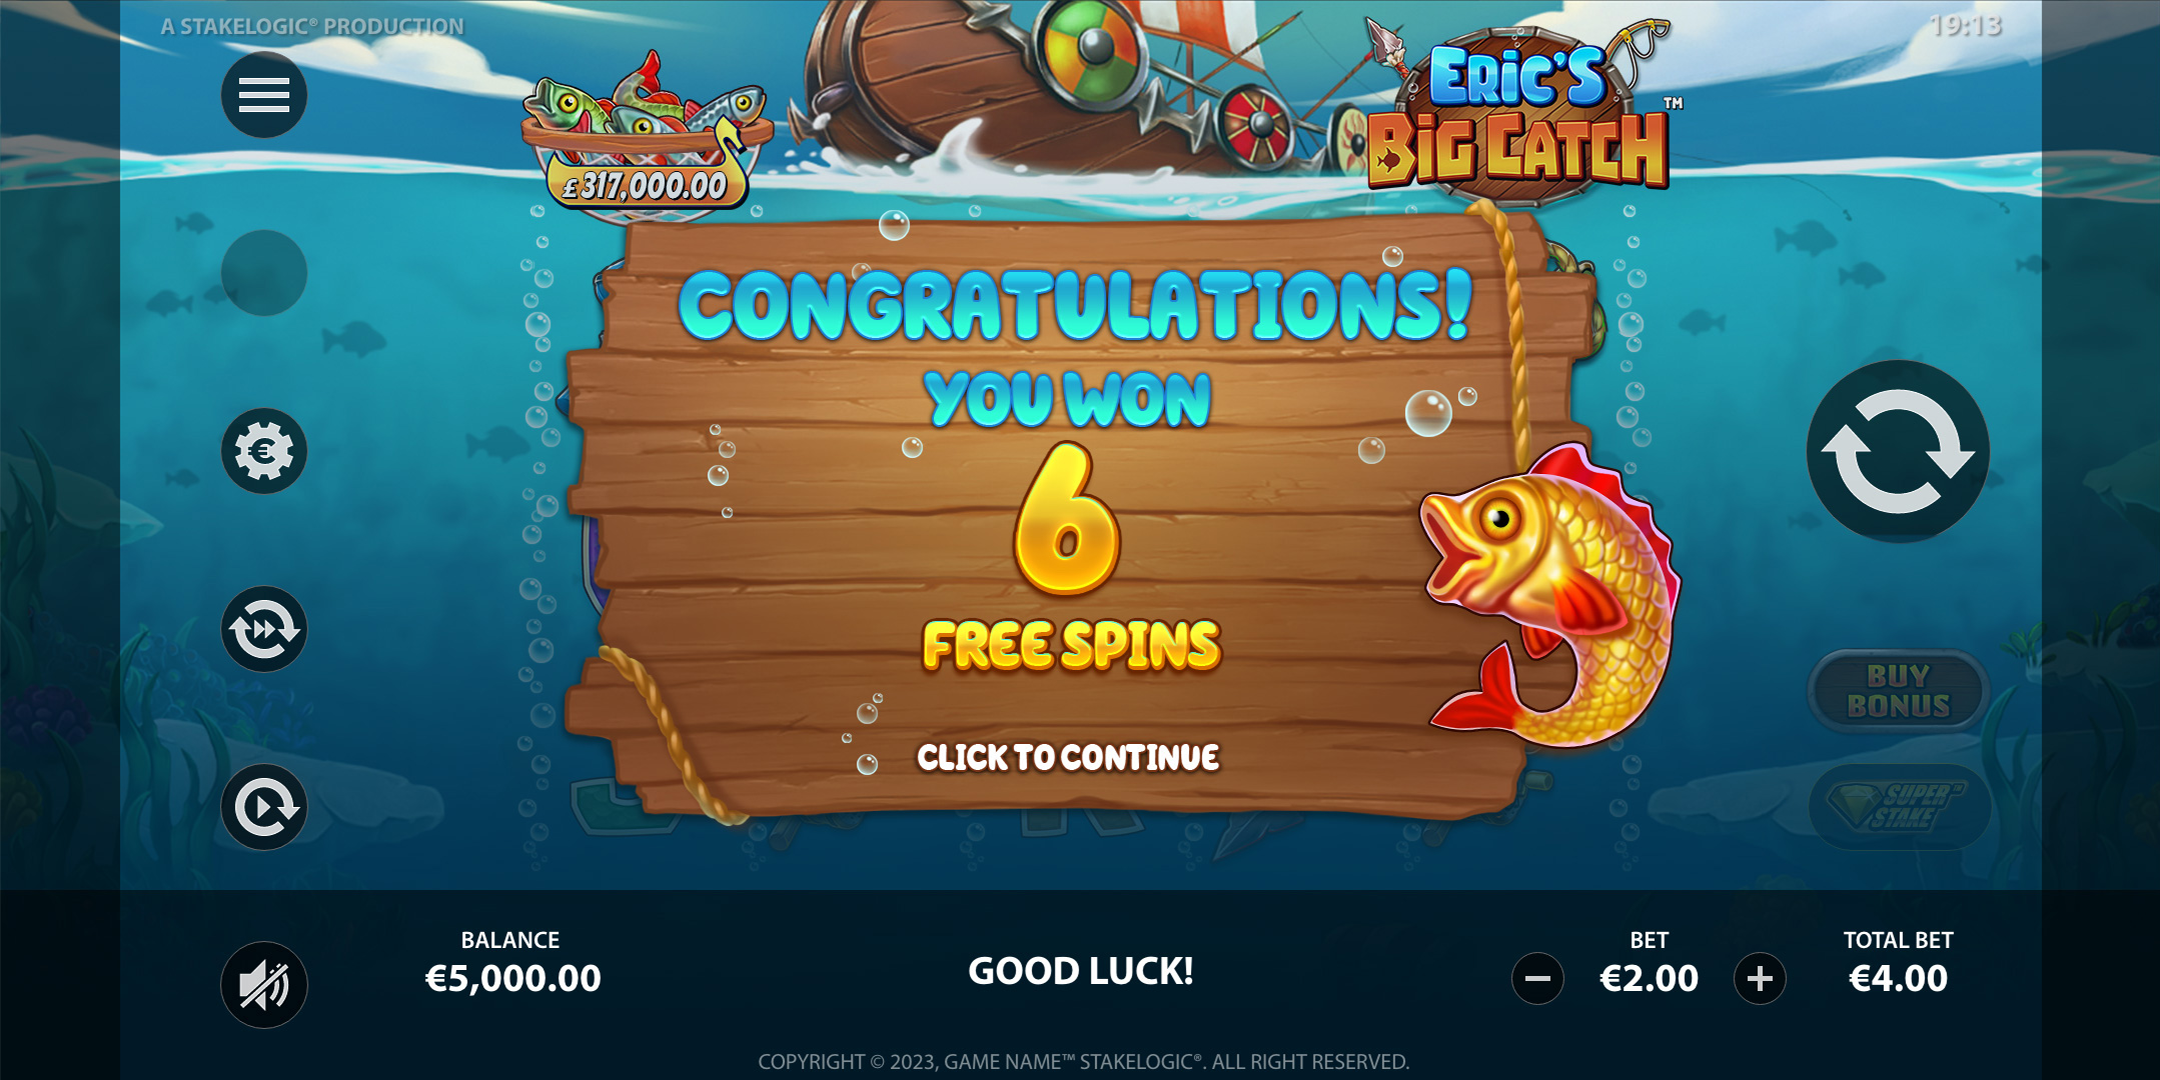 Eric’s Big Catch Free Spins